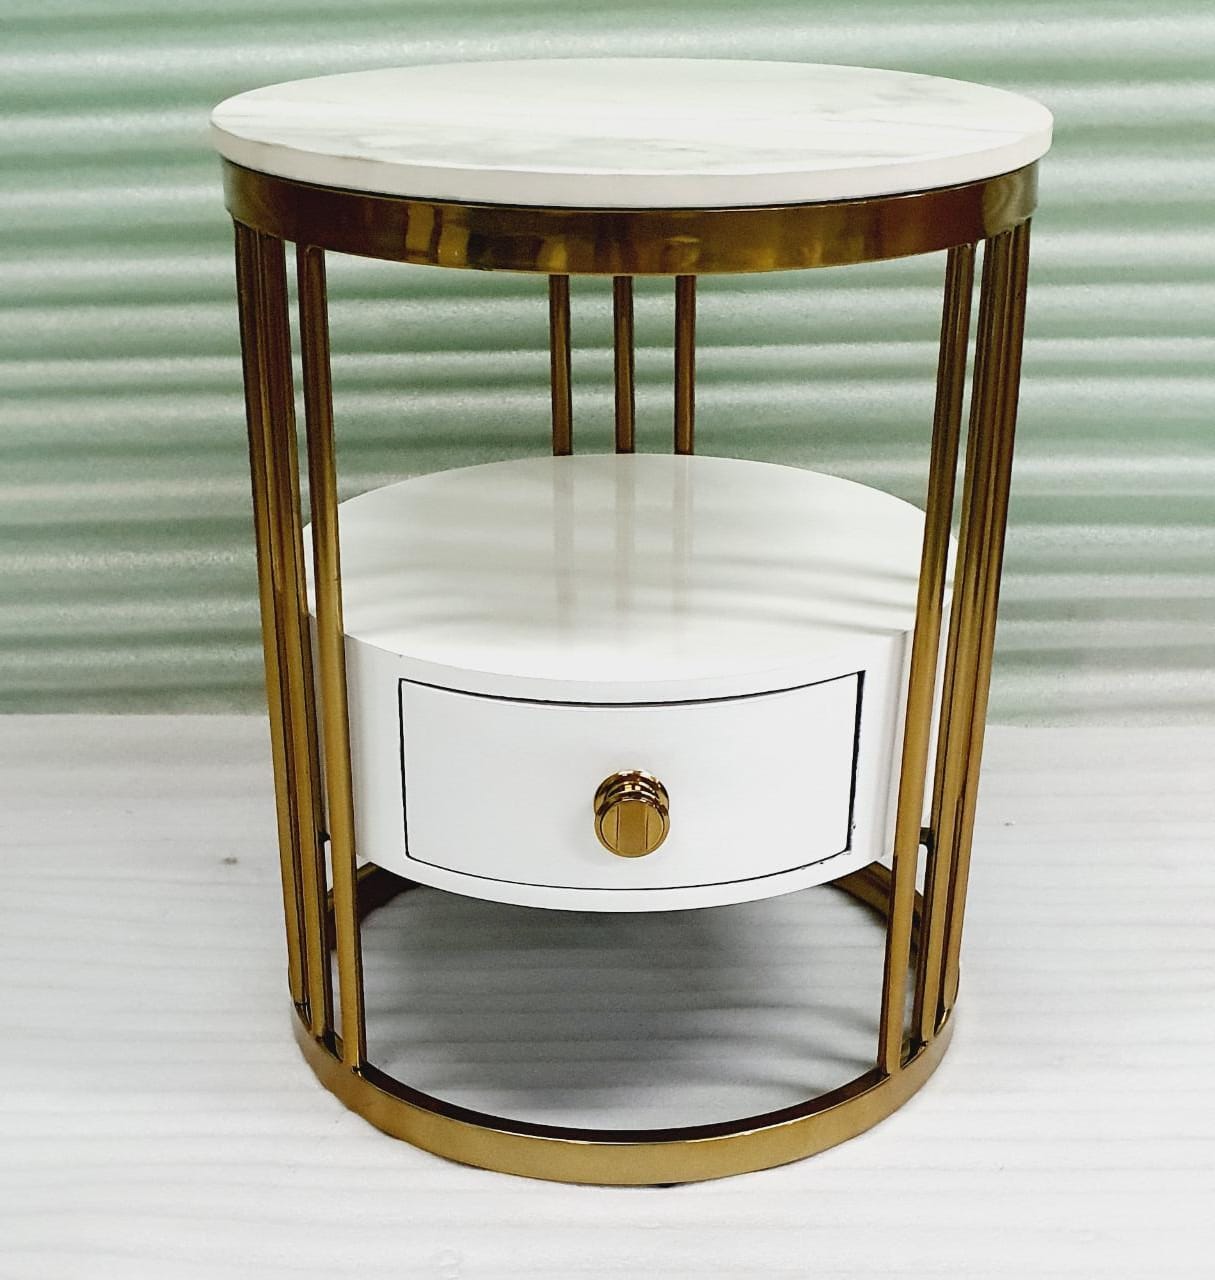 Steel Coffee Table with Drawer, Gold and White  | Stylish and Functional Furniture